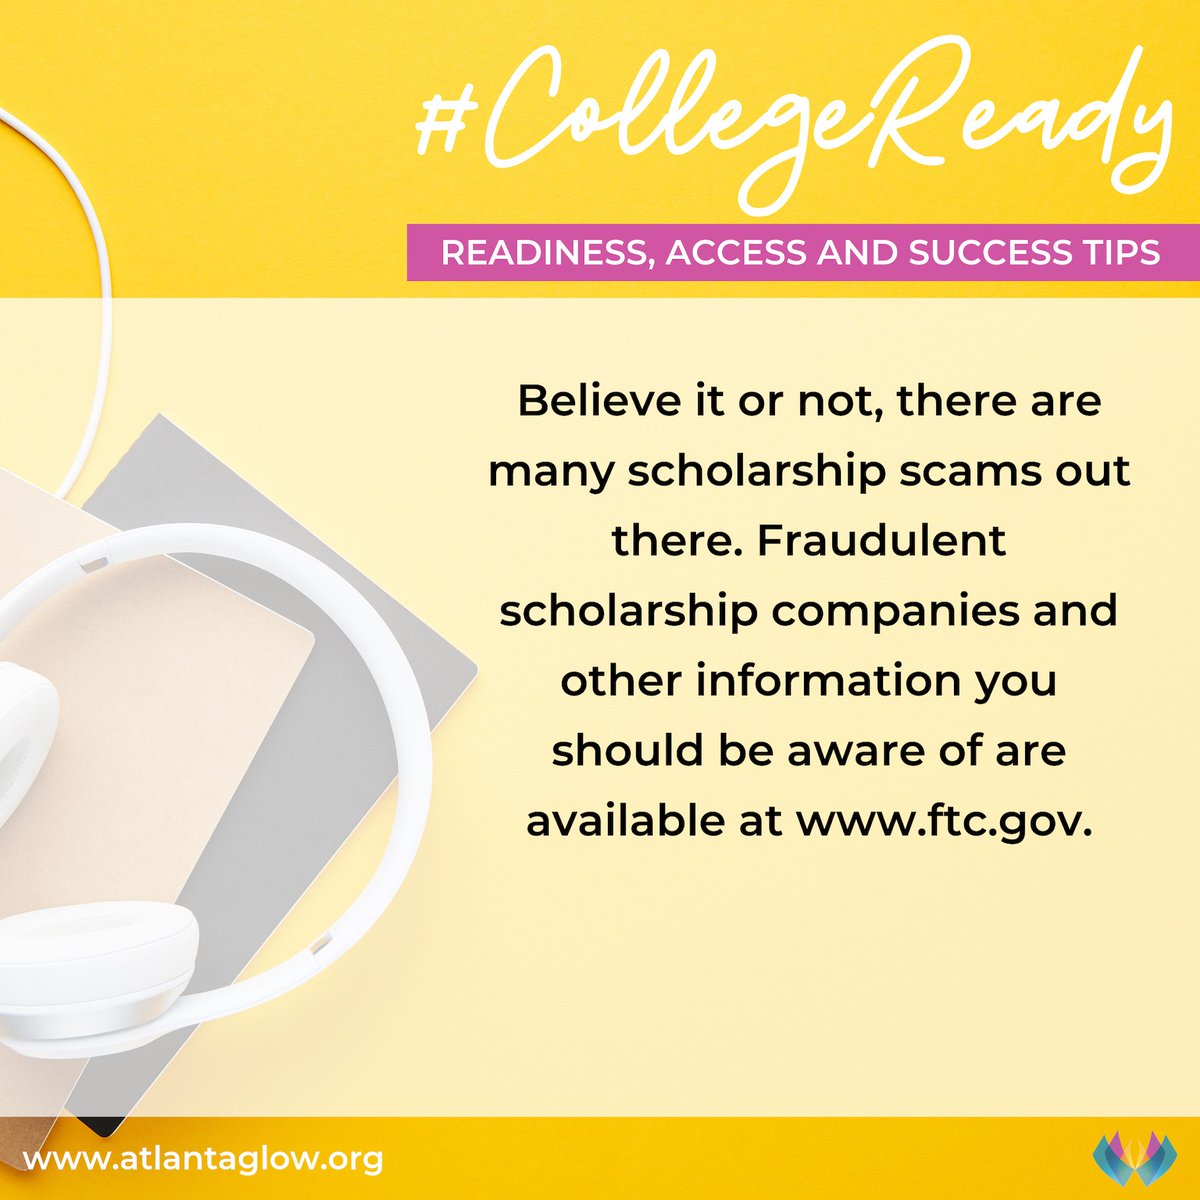 Getting into and succeeding in college can be a difficult journey to navigate alone. That’s why each week, we’re sharing vital college readiness, access and success strategies to help you get and stay #CollegeReady